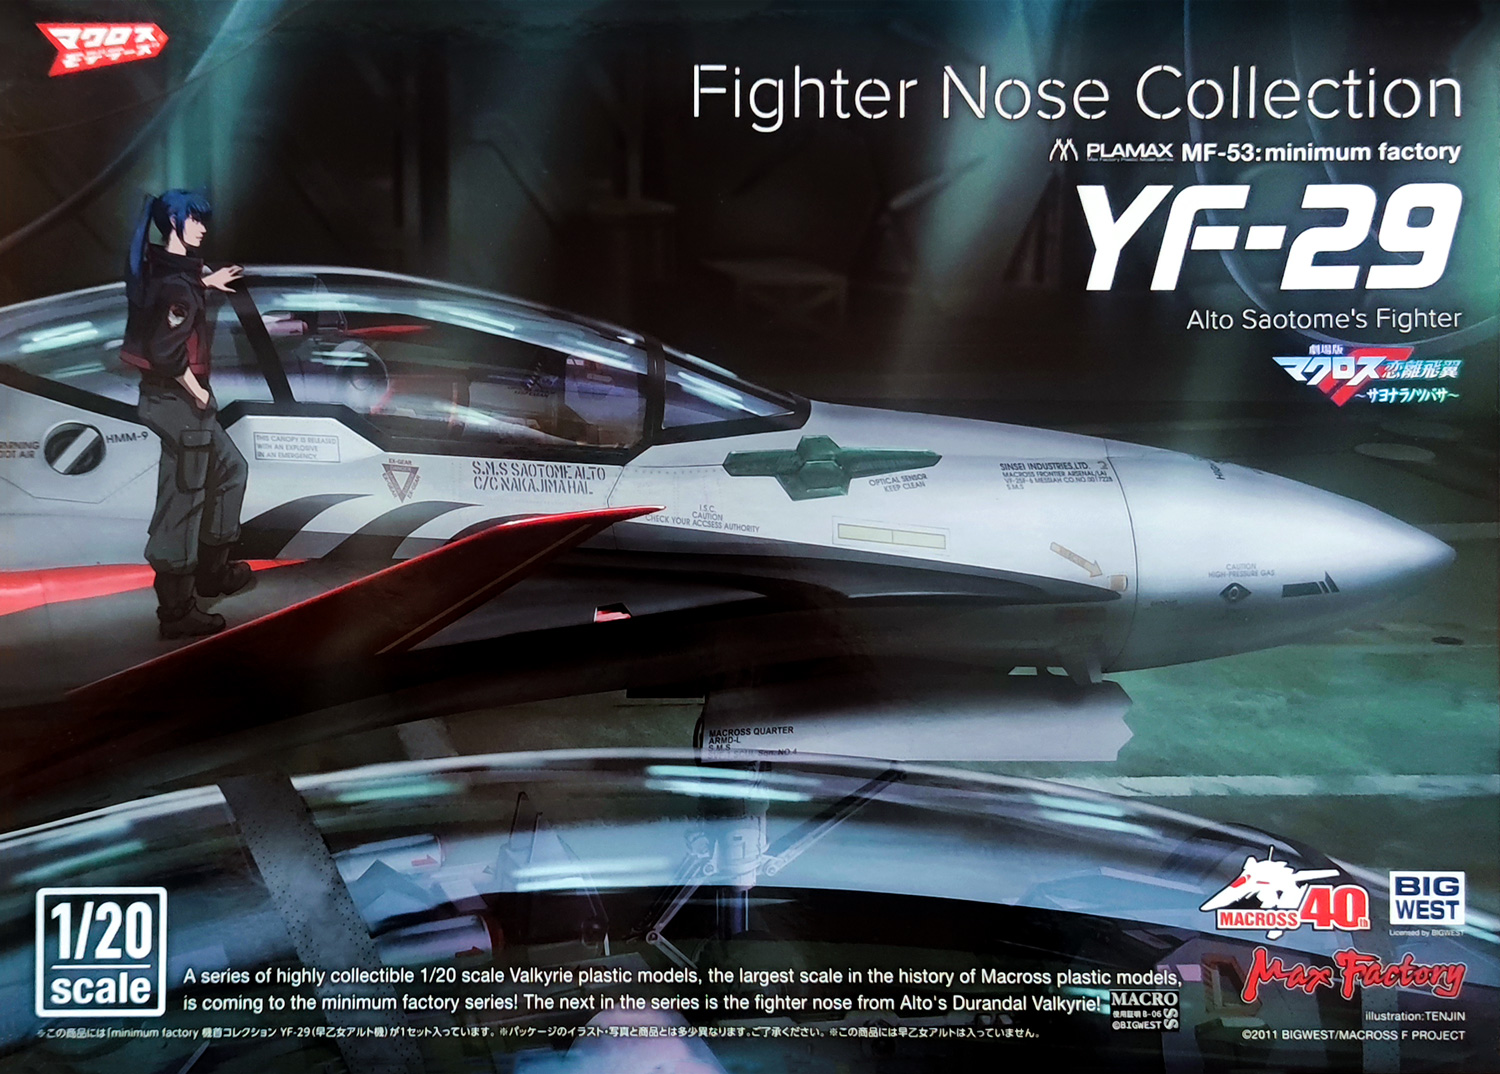 MAX FACTORY MACROSS Plamax Fighter Nose Collection YF-29 (Alto Saotome’s Fighter)